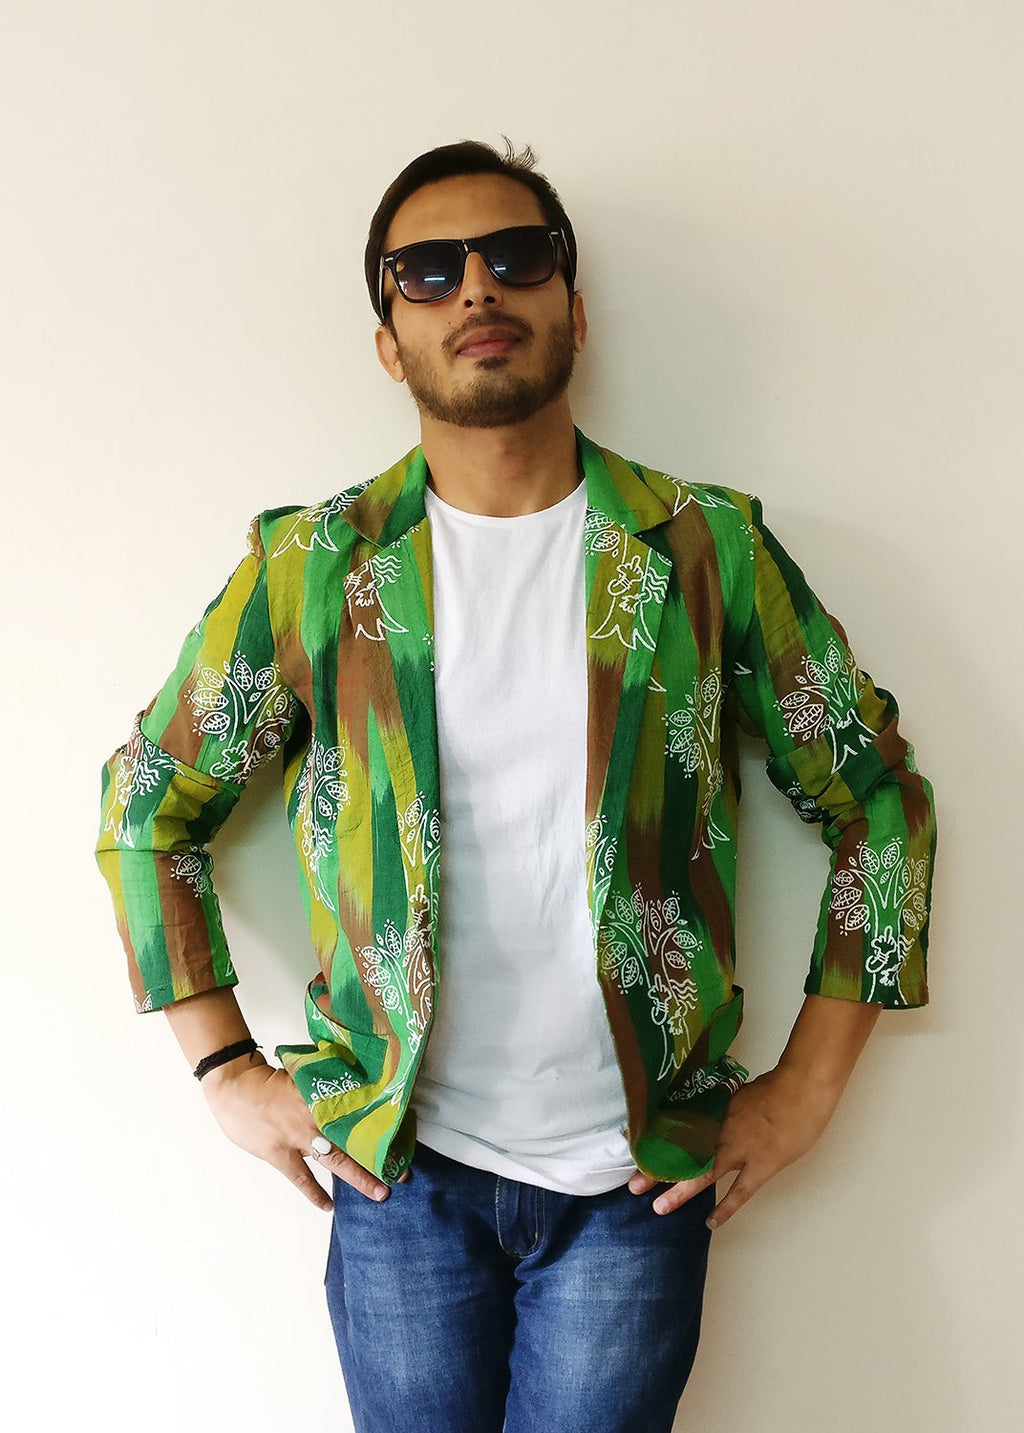 We protect trees, our lifeline, our land, our planet, like the women in Chipko Movement. Statement blazer jacket (green) for men. Handloom cotton with the help of the earth.